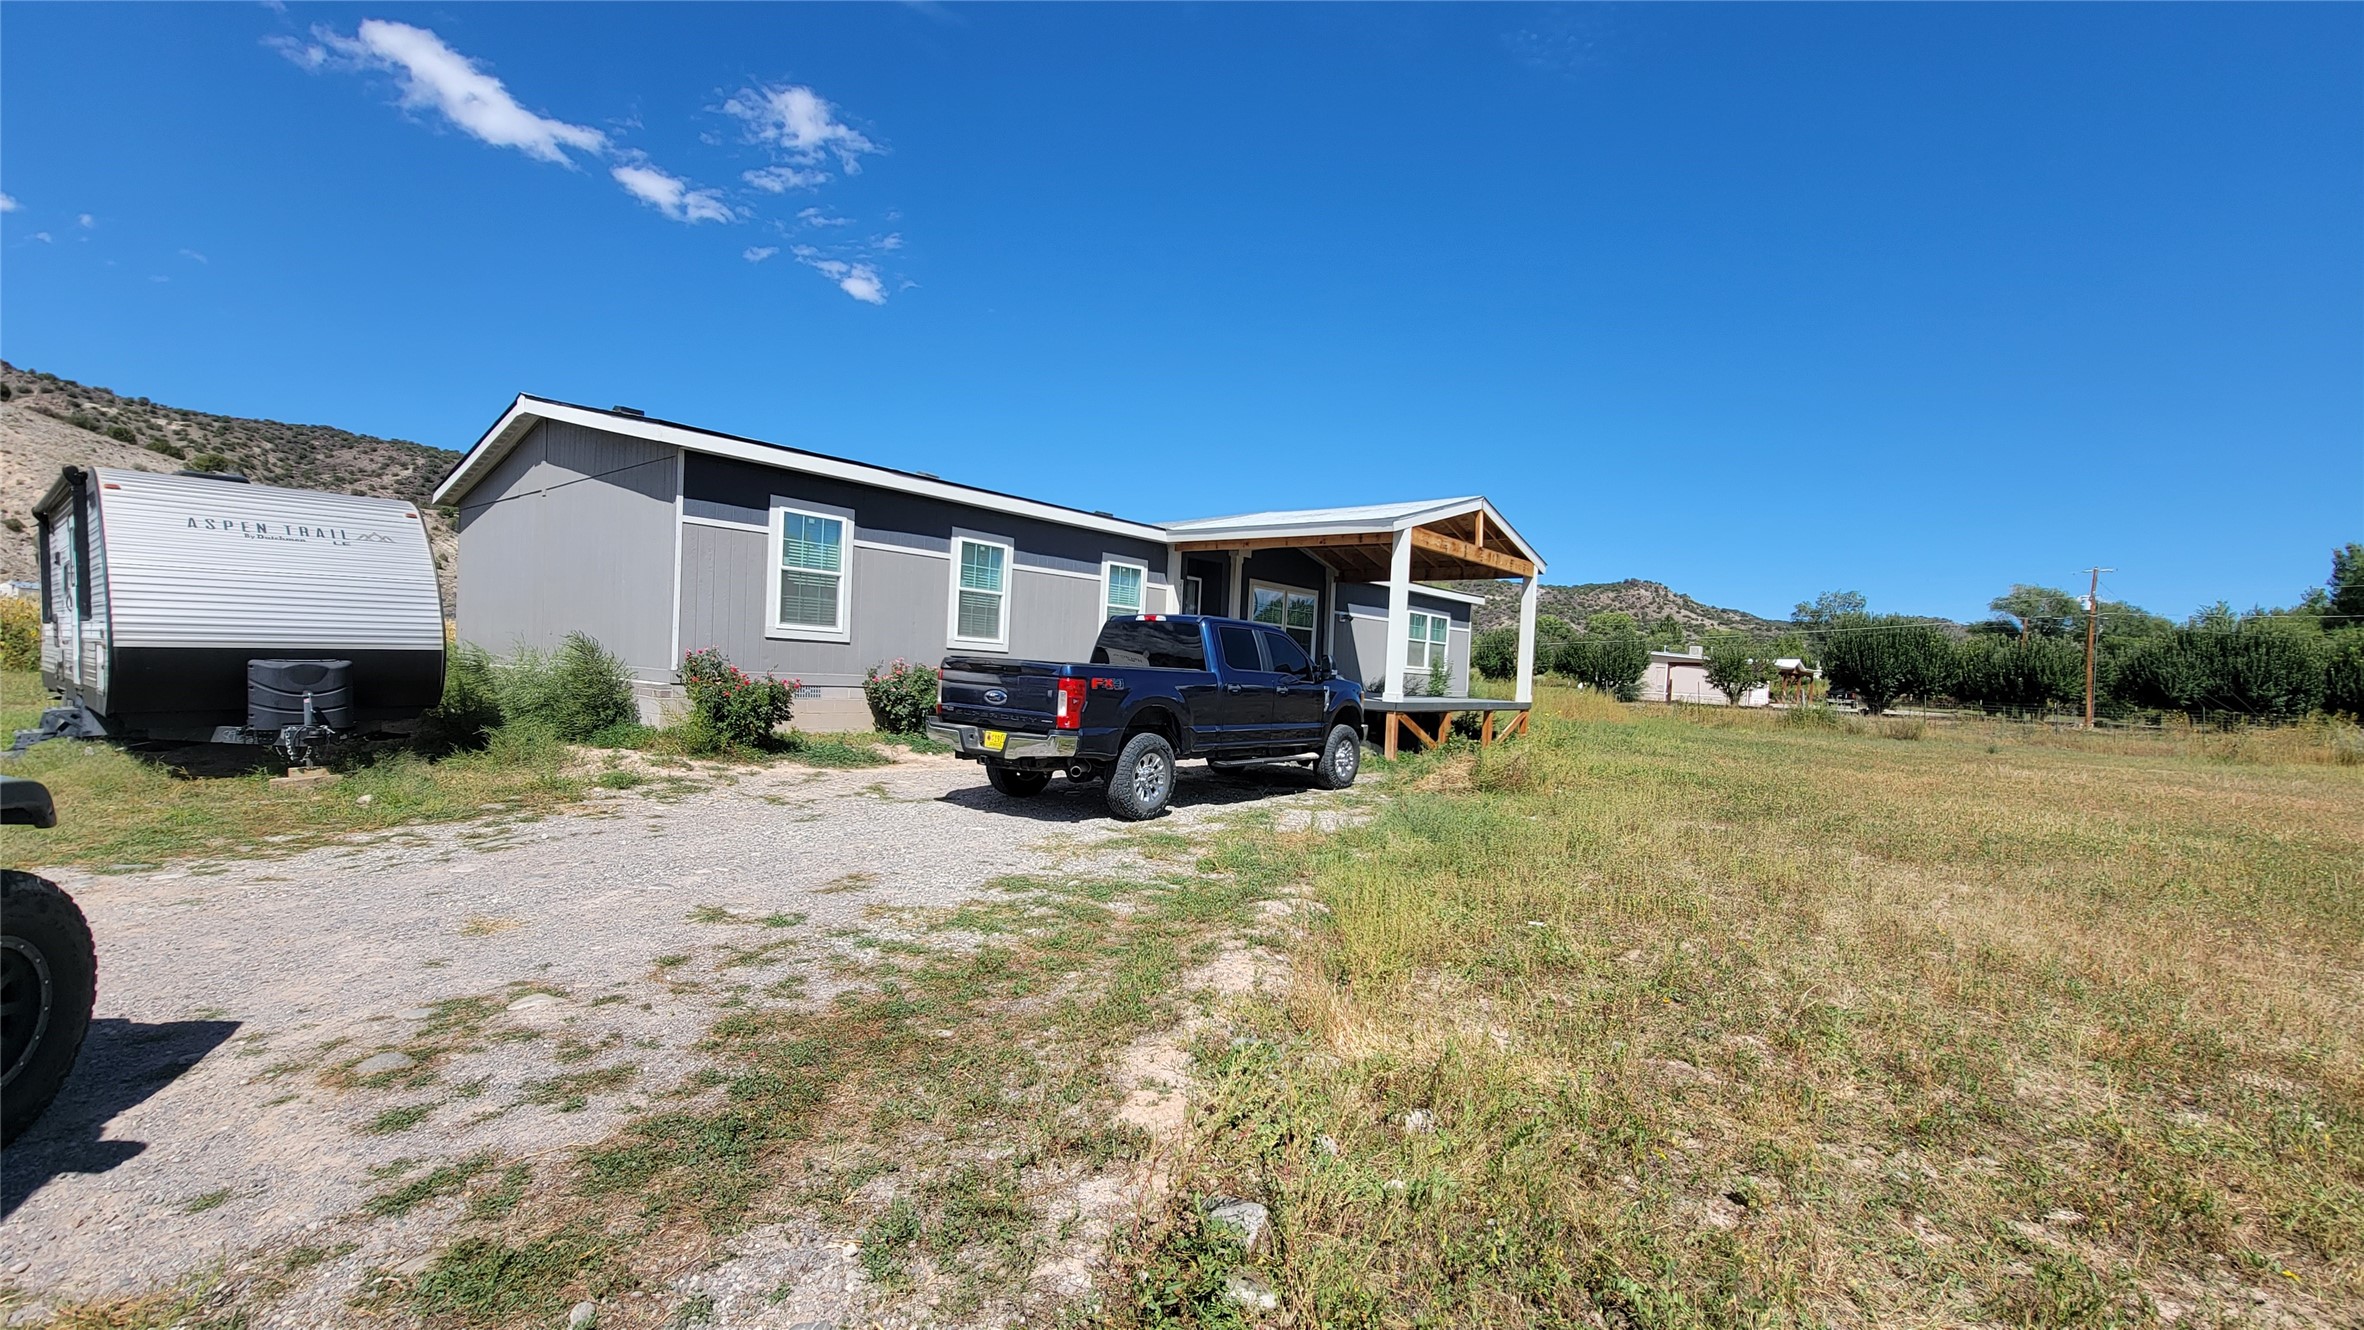 739 County Road 57, Lyden, New Mexico 87582, 4 Bedrooms Bedrooms, ,2 BathroomsBathrooms,Residential,For Sale,739 County Road 57,202233193